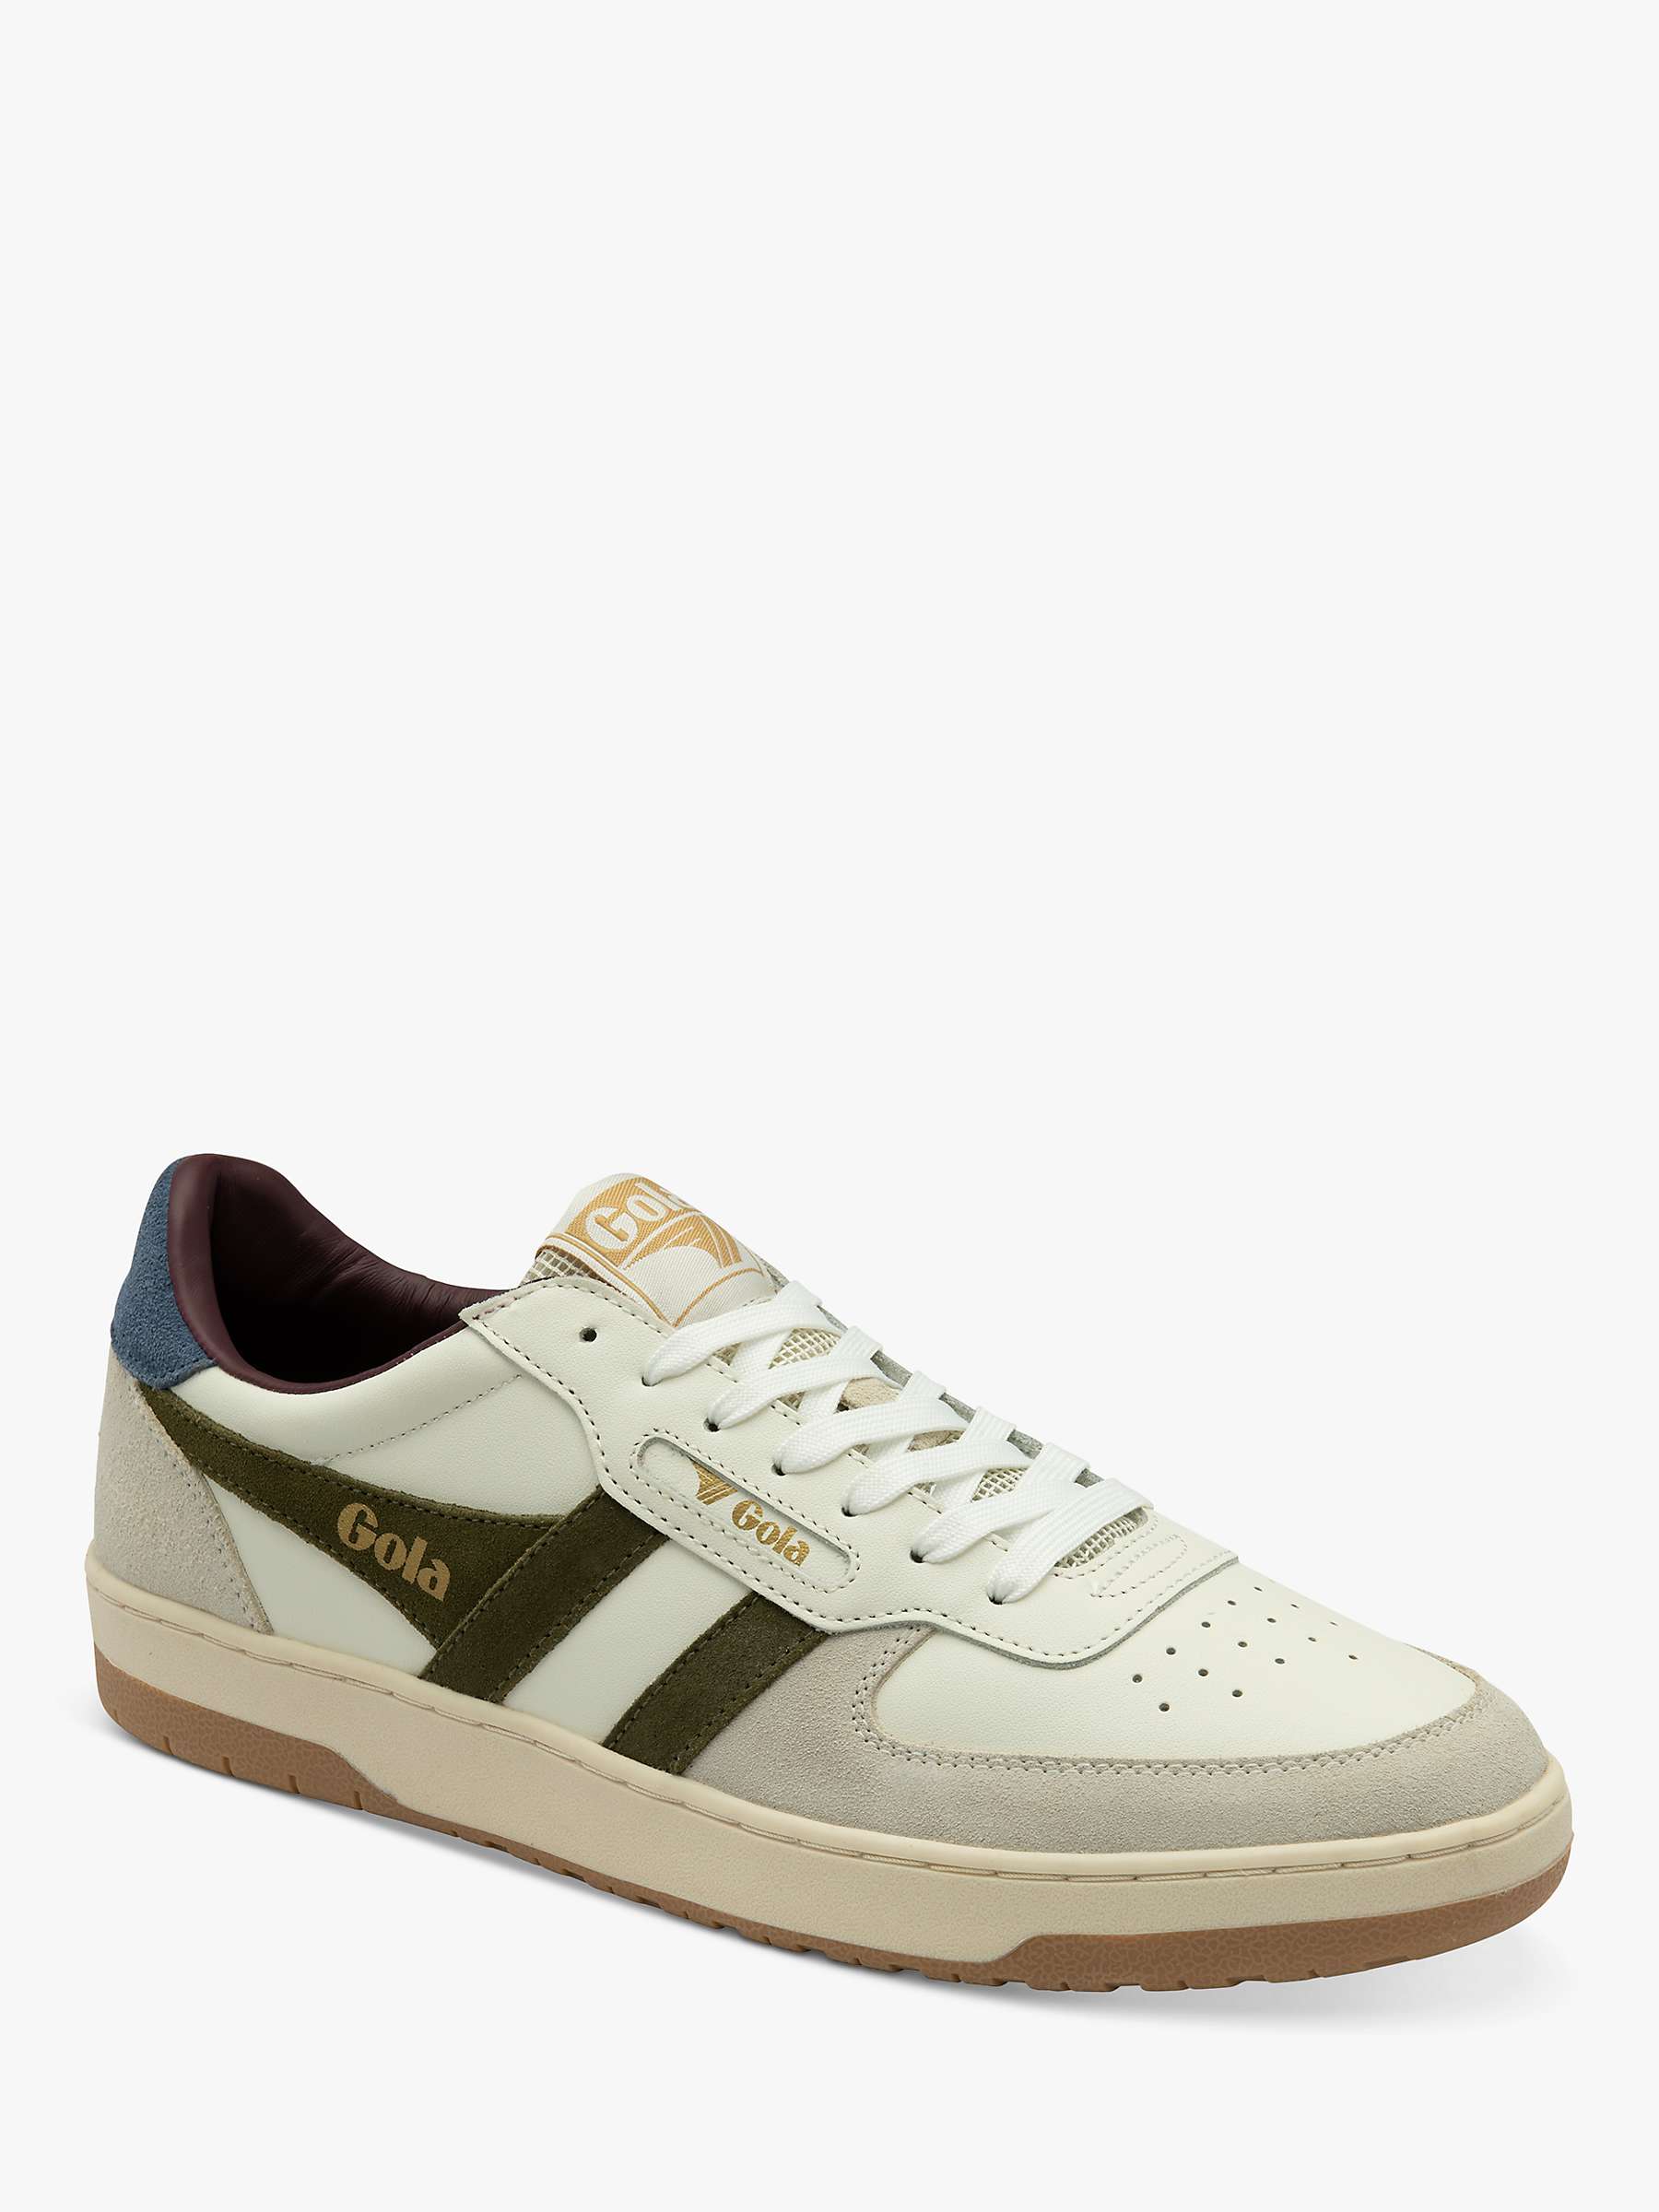 Gola Classics Hawk Leather Lace Up Trainers, Whte/Green at John Lewis ...